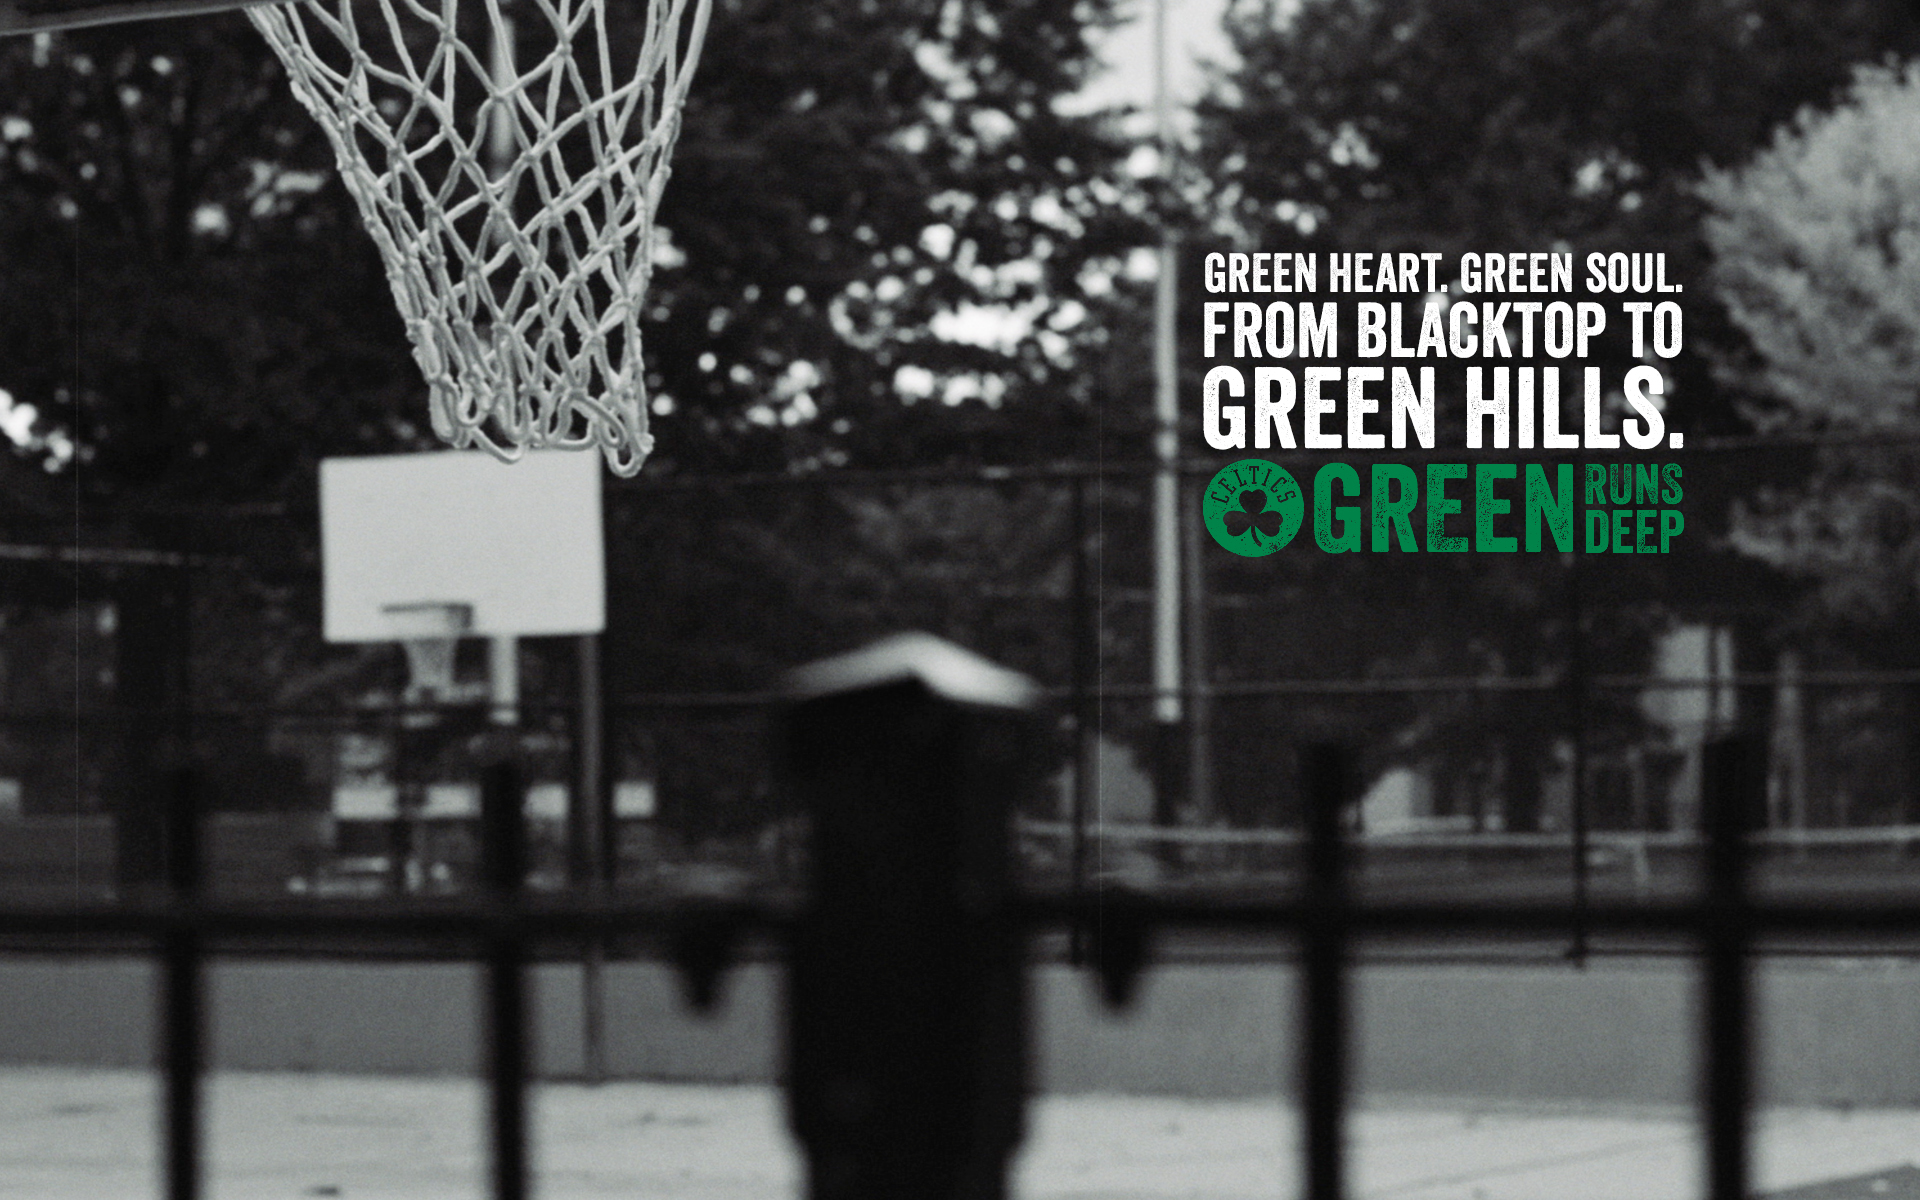 FROM BLACKTOP TO GREEN HILLS